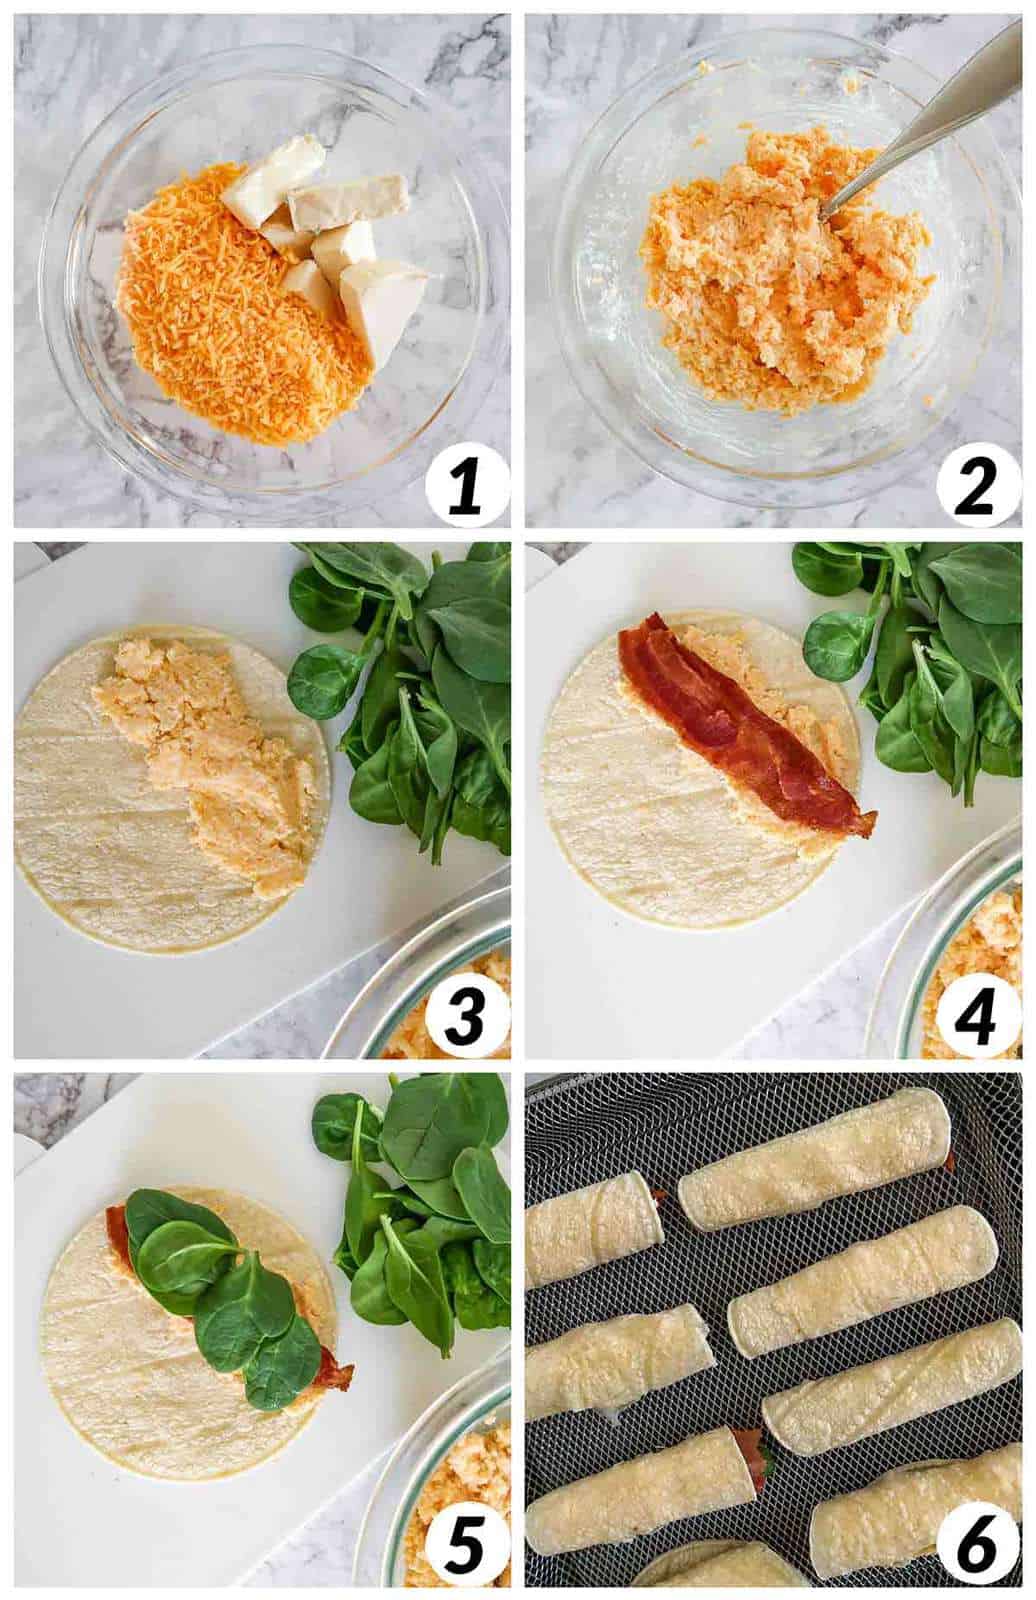 Six panel grid of process shots- mixing ingredients for cheese layer, layering ingredients in taquito, and baking.